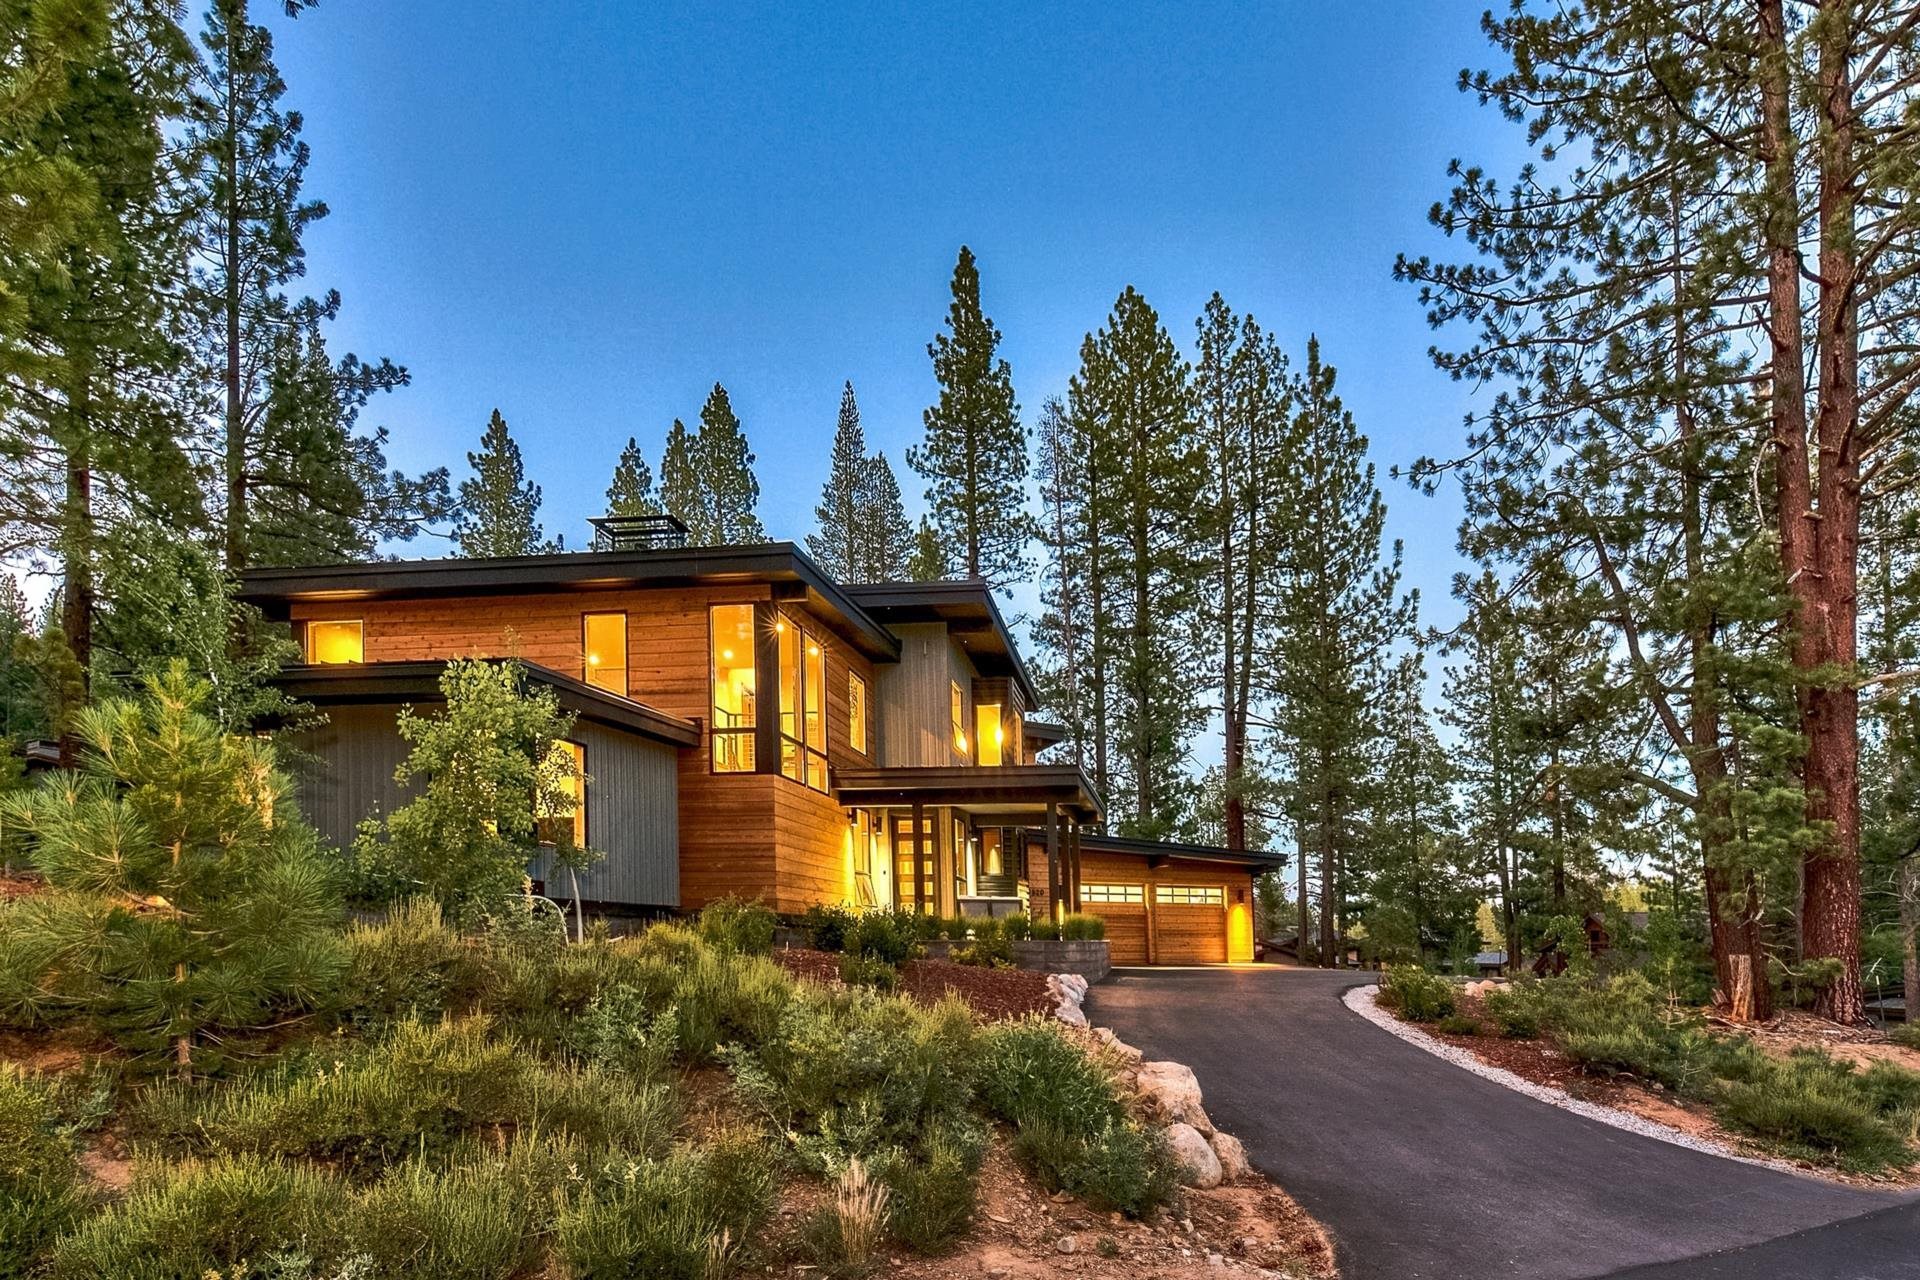 Image for 11520 Ghirard Road, Truckee, CA 96161